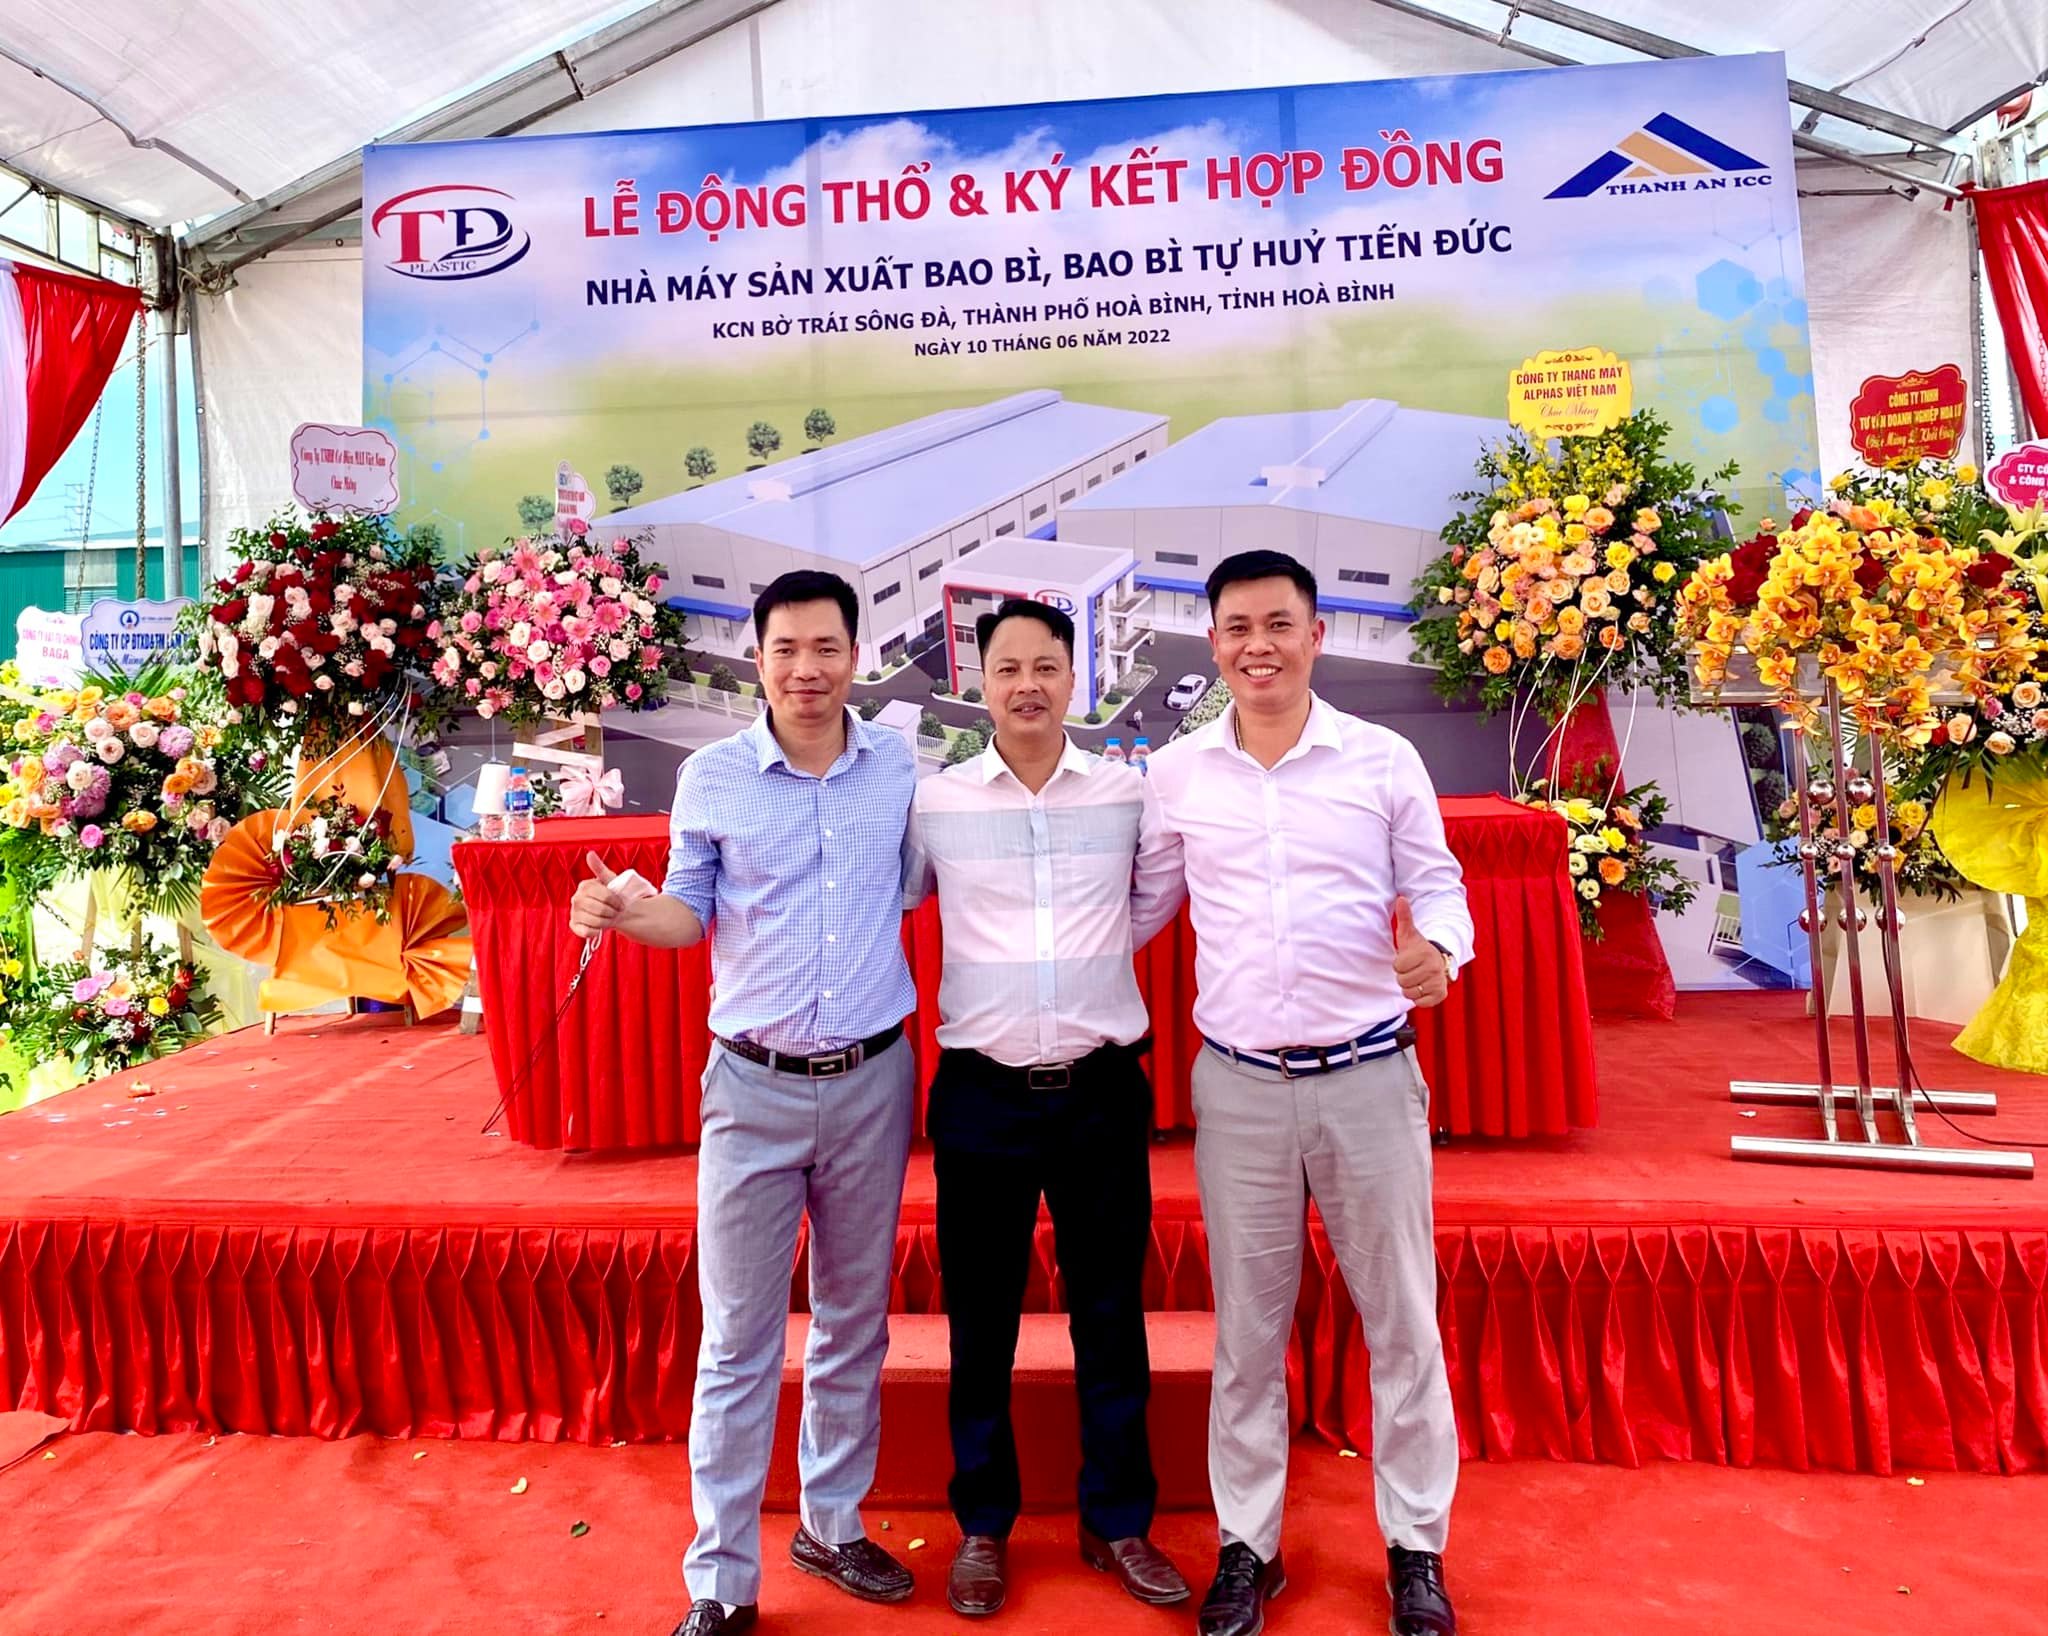 BREAKING CEREMONY PROJECT “PRODUCTION OF PACKAGING, SELF-DUCKING PACKAGING FACTORY”